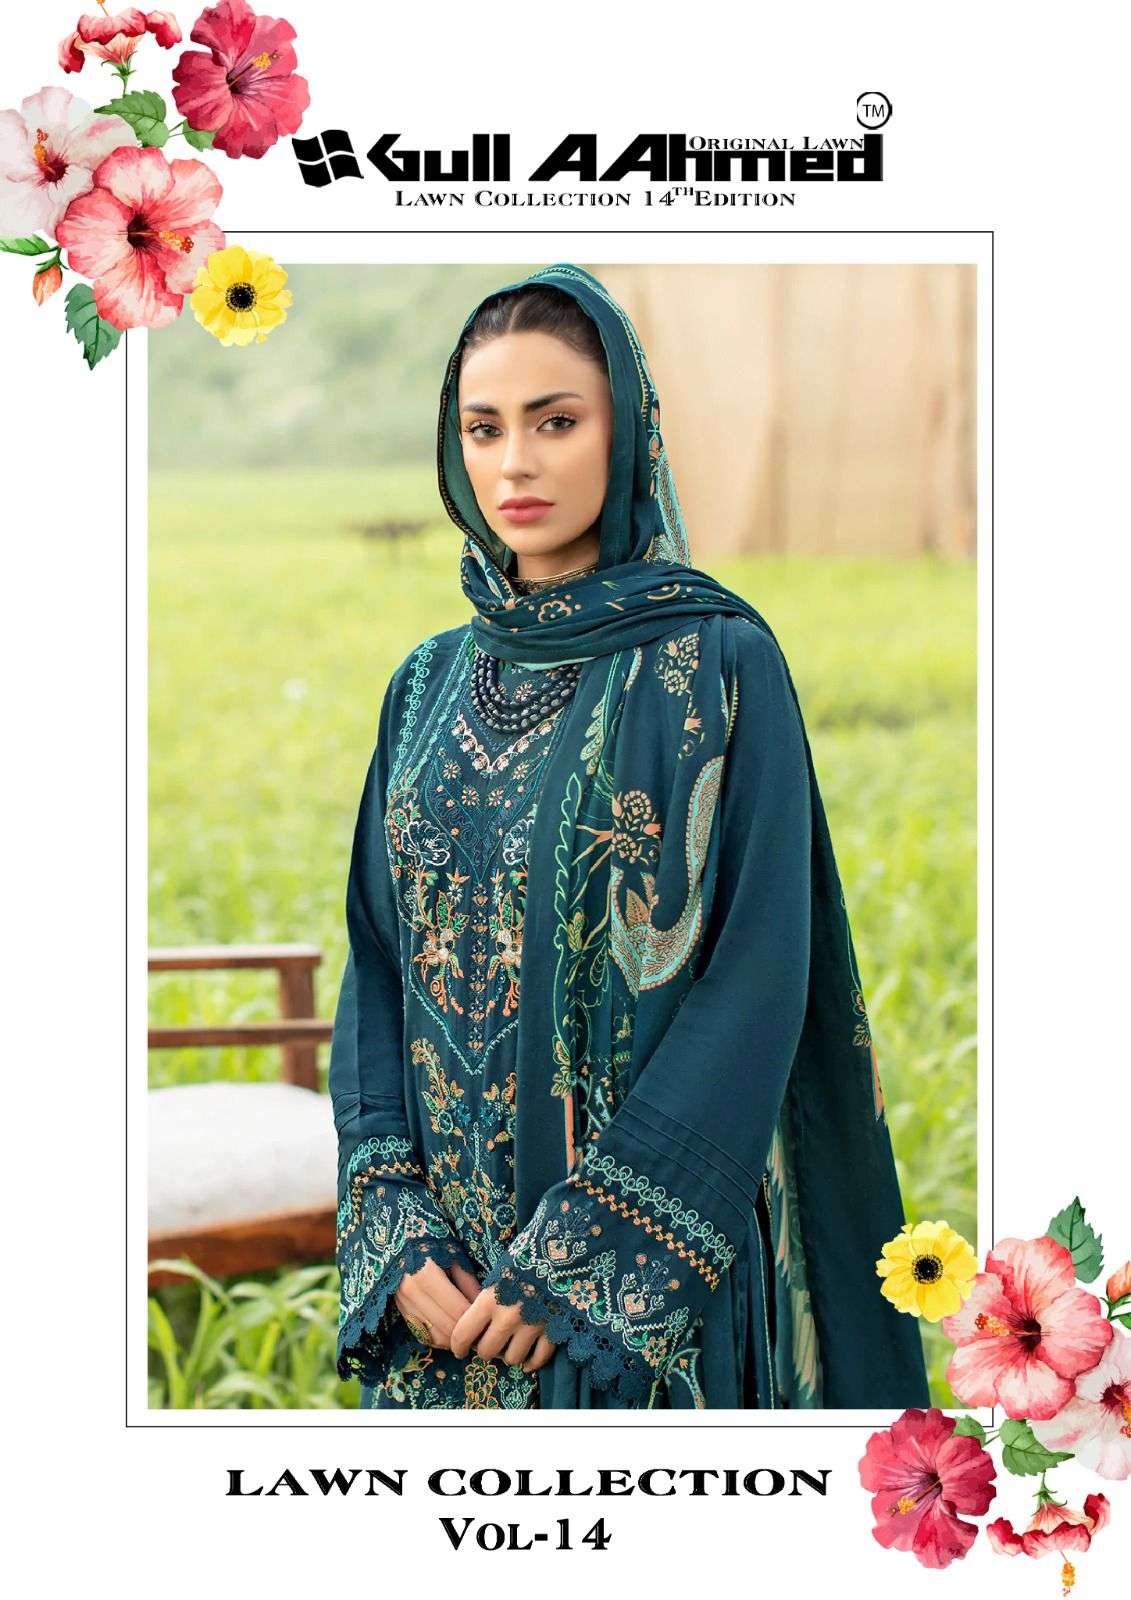 GULl AAHMED LAWN COLLECTION VOL 14